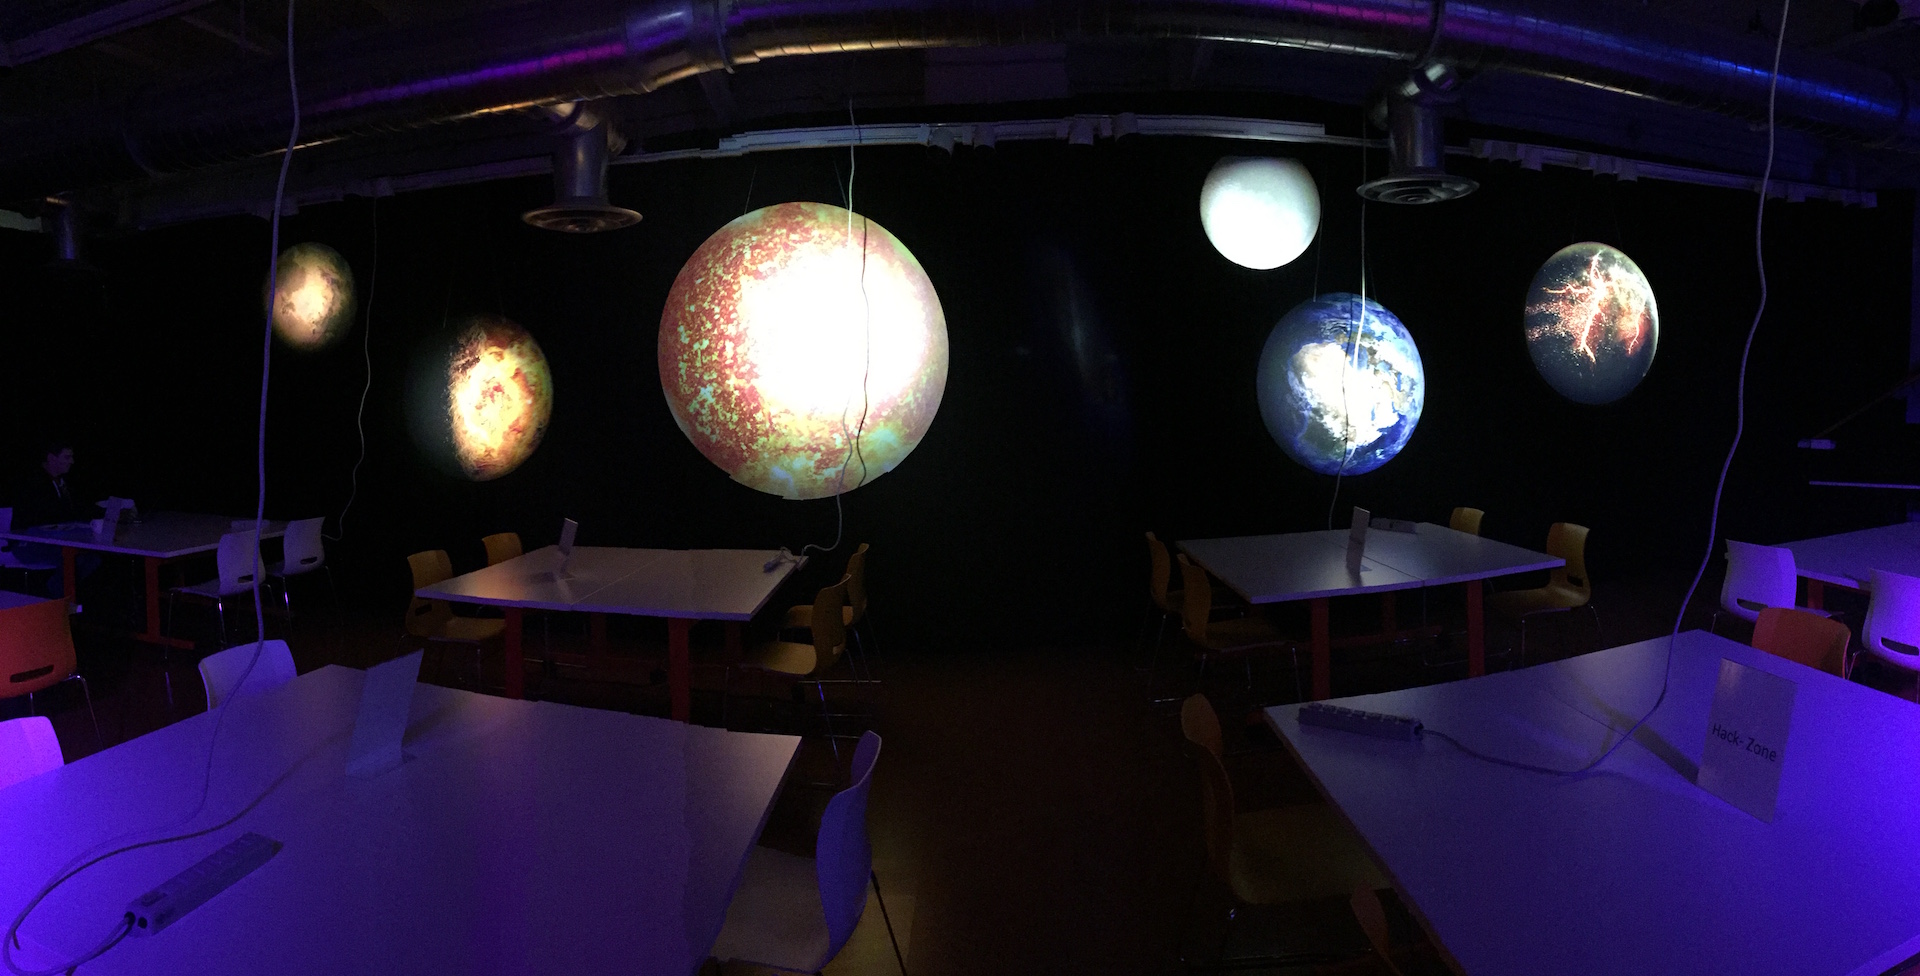 Thick, quality custom signs create a planetary solar system for a space themed hackathon